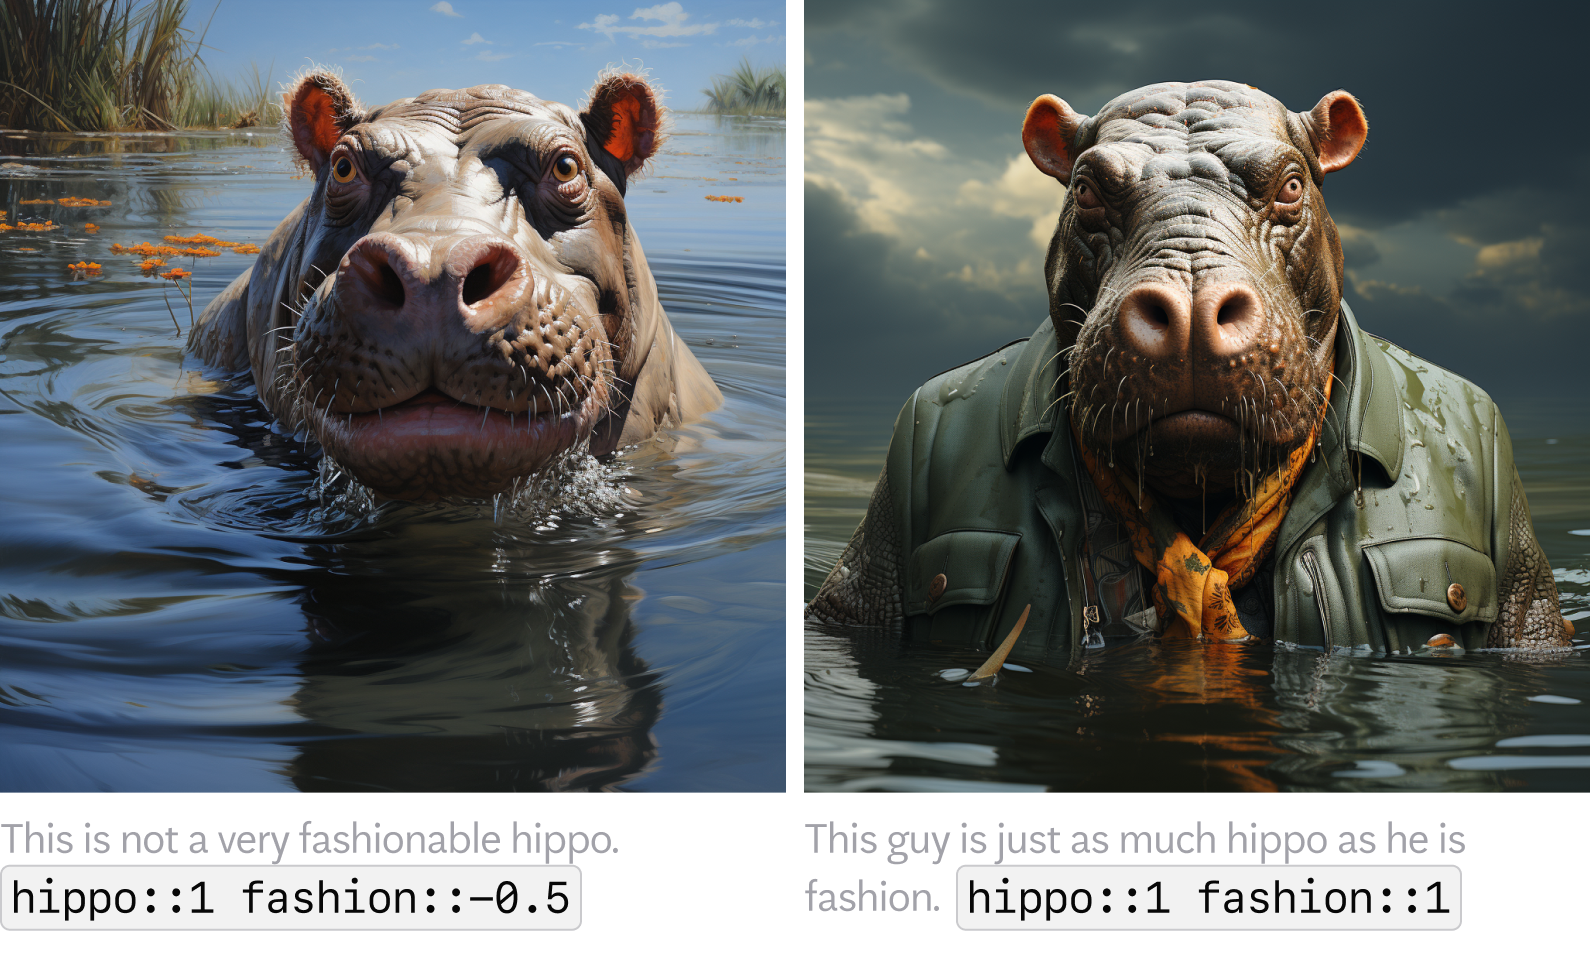 AI-generated image of hippopotamus in water wearing a green jacket and a scarf